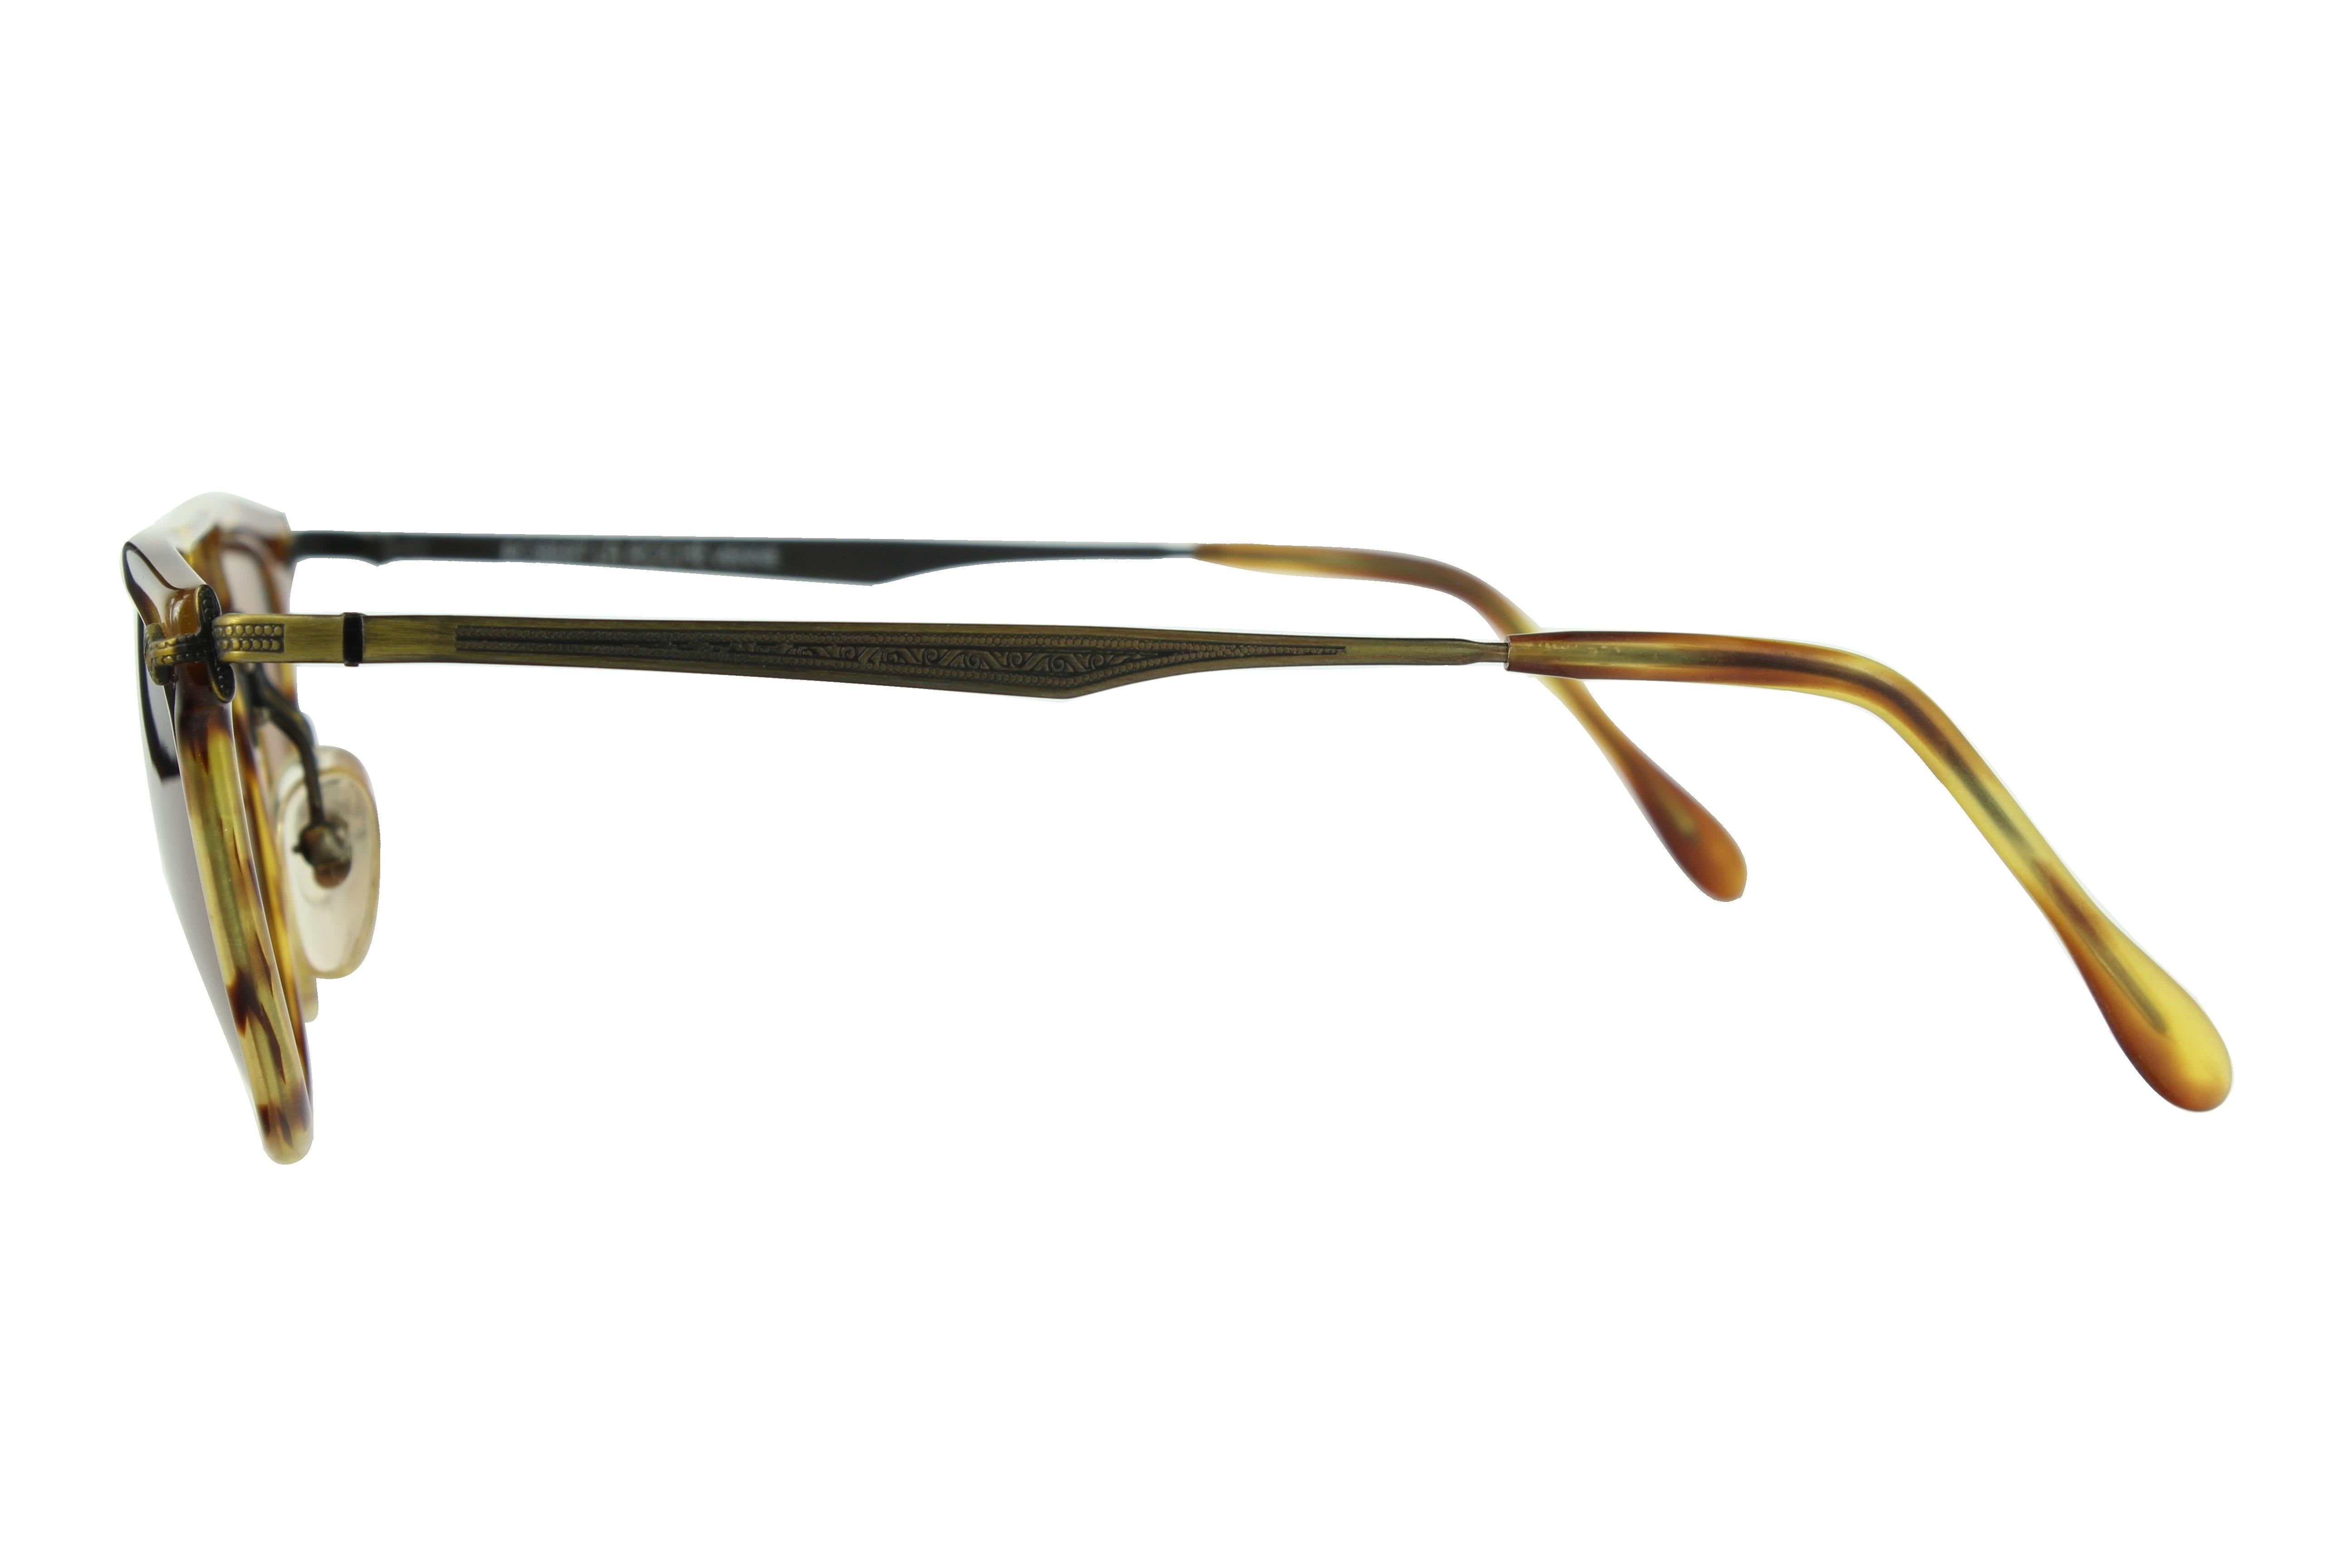 Designed by Robert La Roche in the 80´s. It has a classic wayfarer design. It is framed by a straight acetate bar made with highest quality material, mazzucchelli acetate. Its metal rods give it lightness and comfort.

Measurements
- Distance